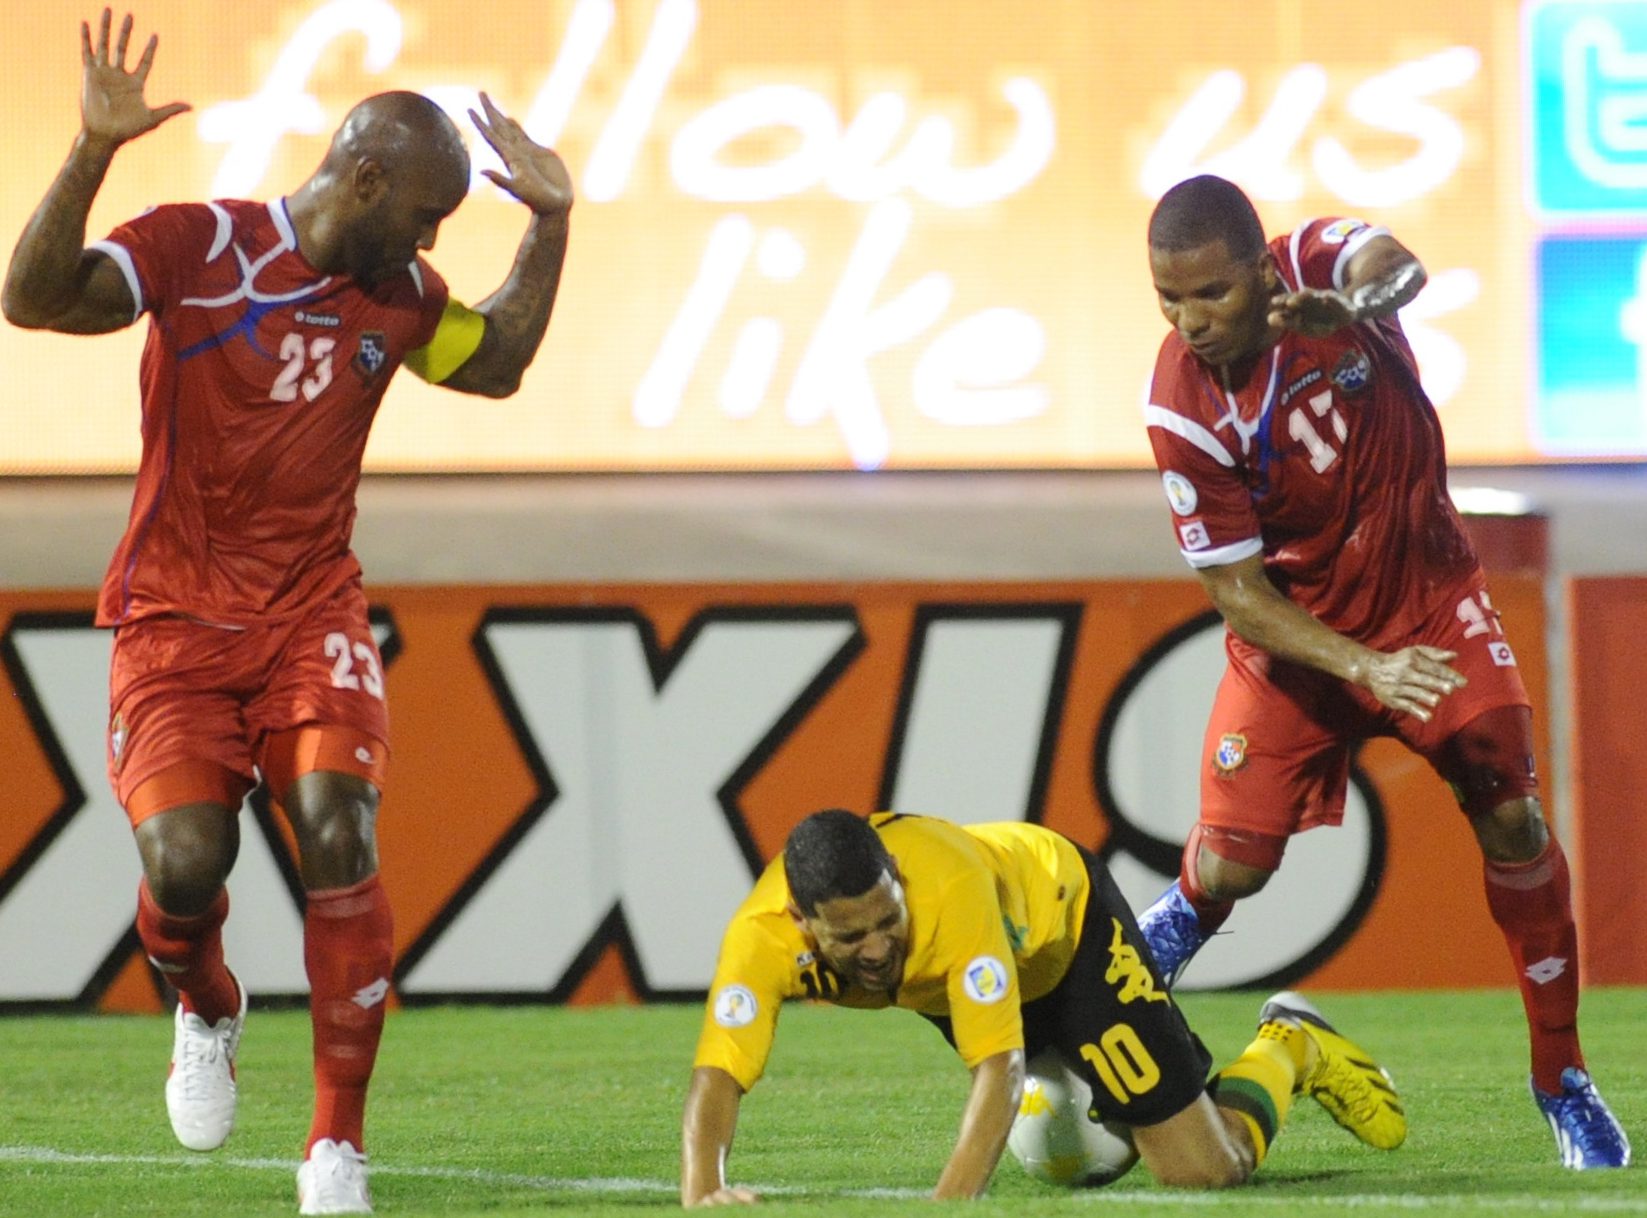 Panamanian players (L) Felipe Baloy and Luis Henriquez (R) try to avoid the fallen Joel McAnuf (C) of Jamaica during their Concacaf World Cup qualifier Jamaica vs Panma at the National Stadium in Kingston, Jamaica. AFP PHOTO / Ricardo MAKYN (Photo credit should read RICARDO MAKYN/AFP/Getty Images)